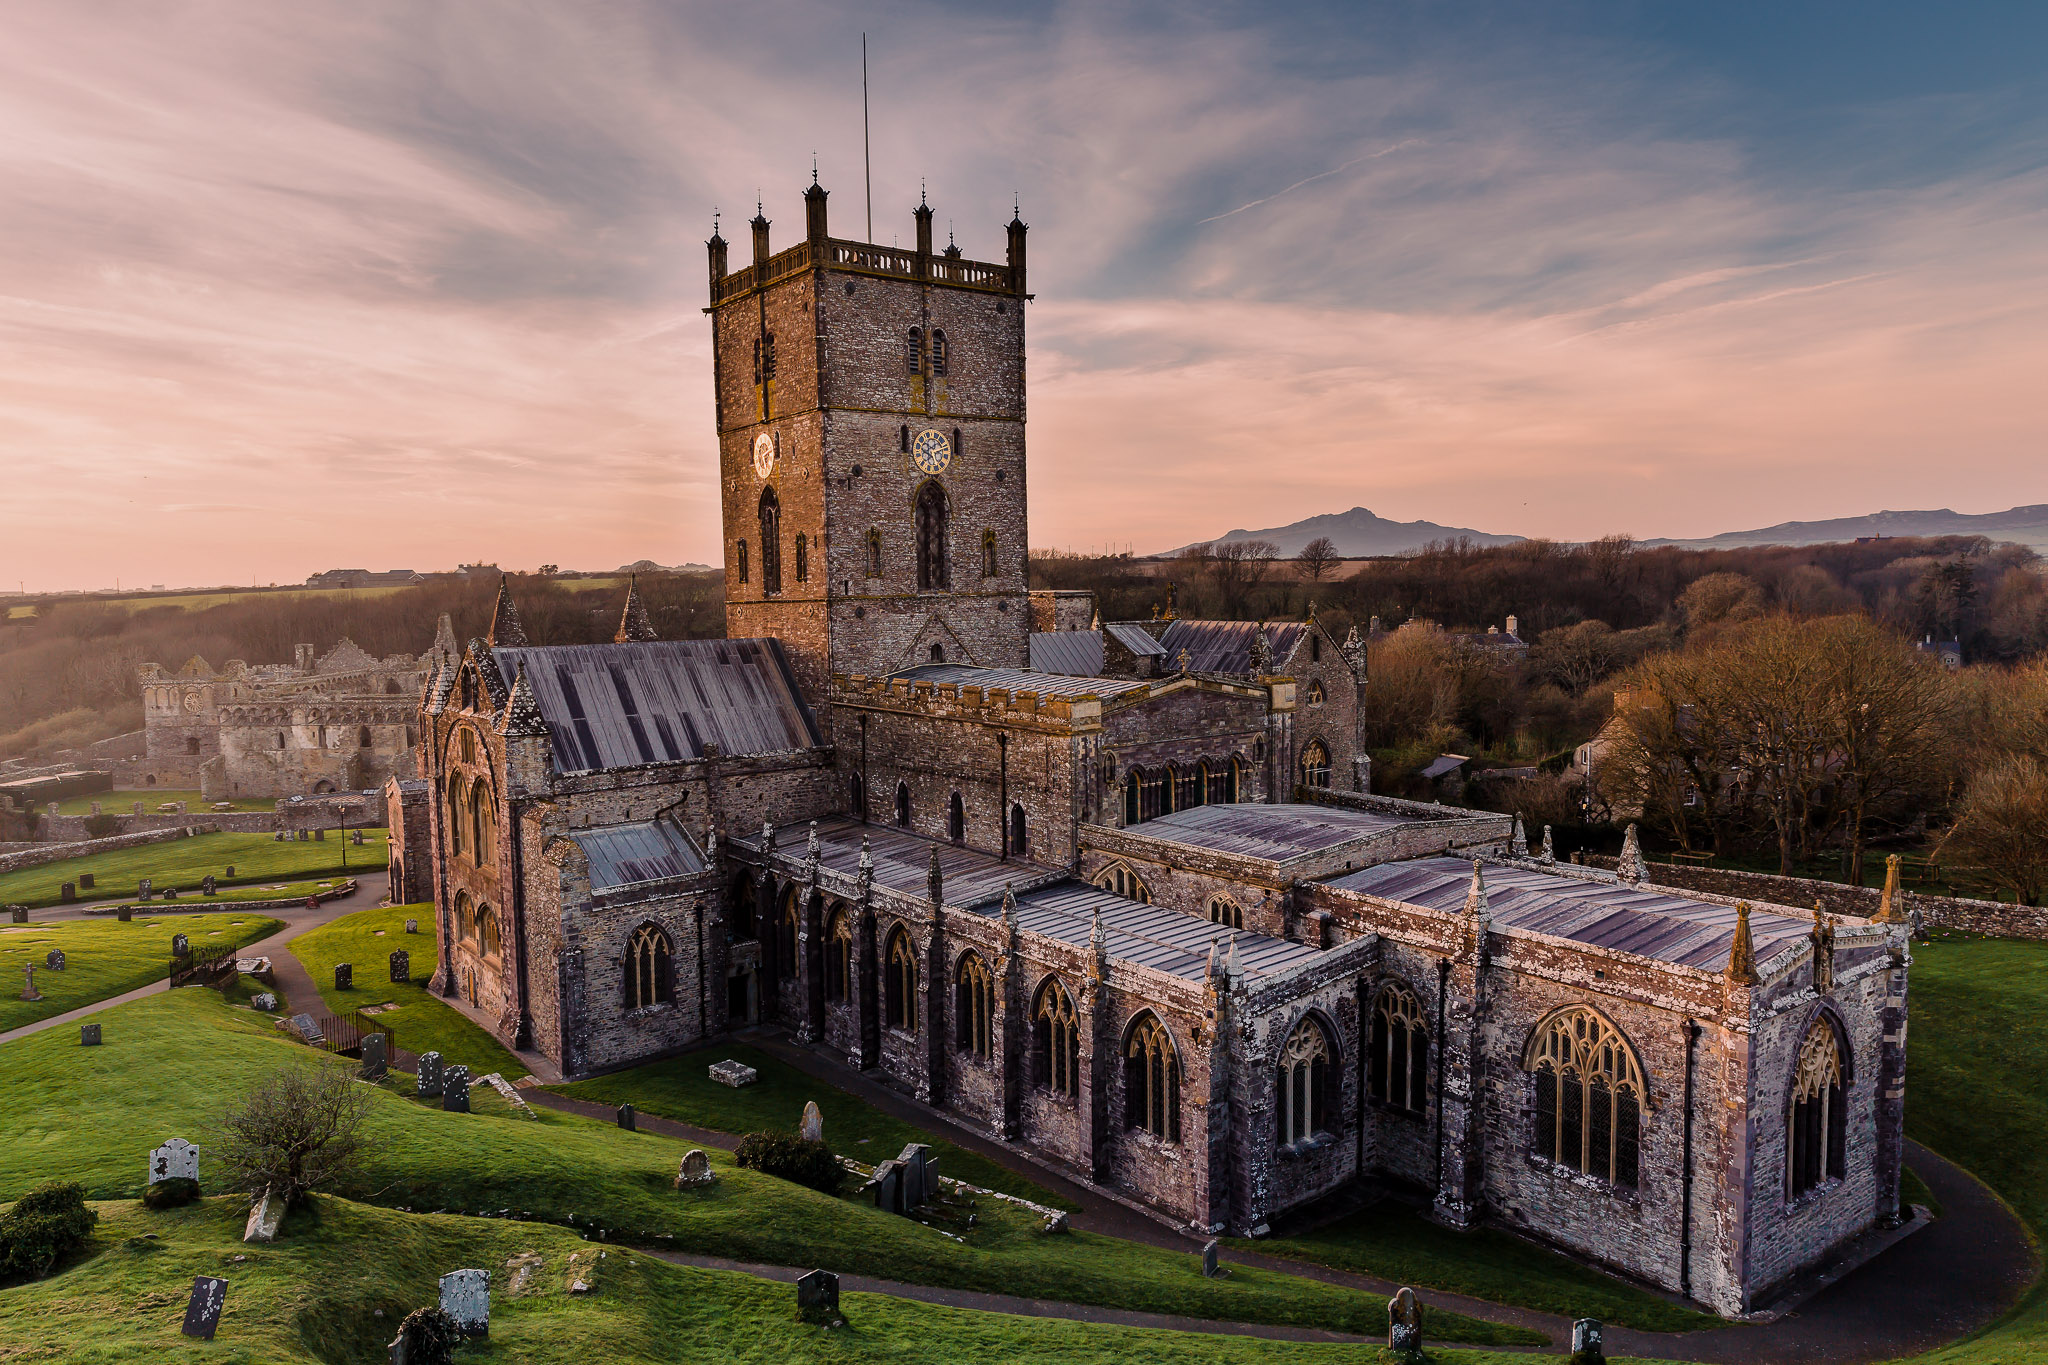 St David's Cathedral at sunset